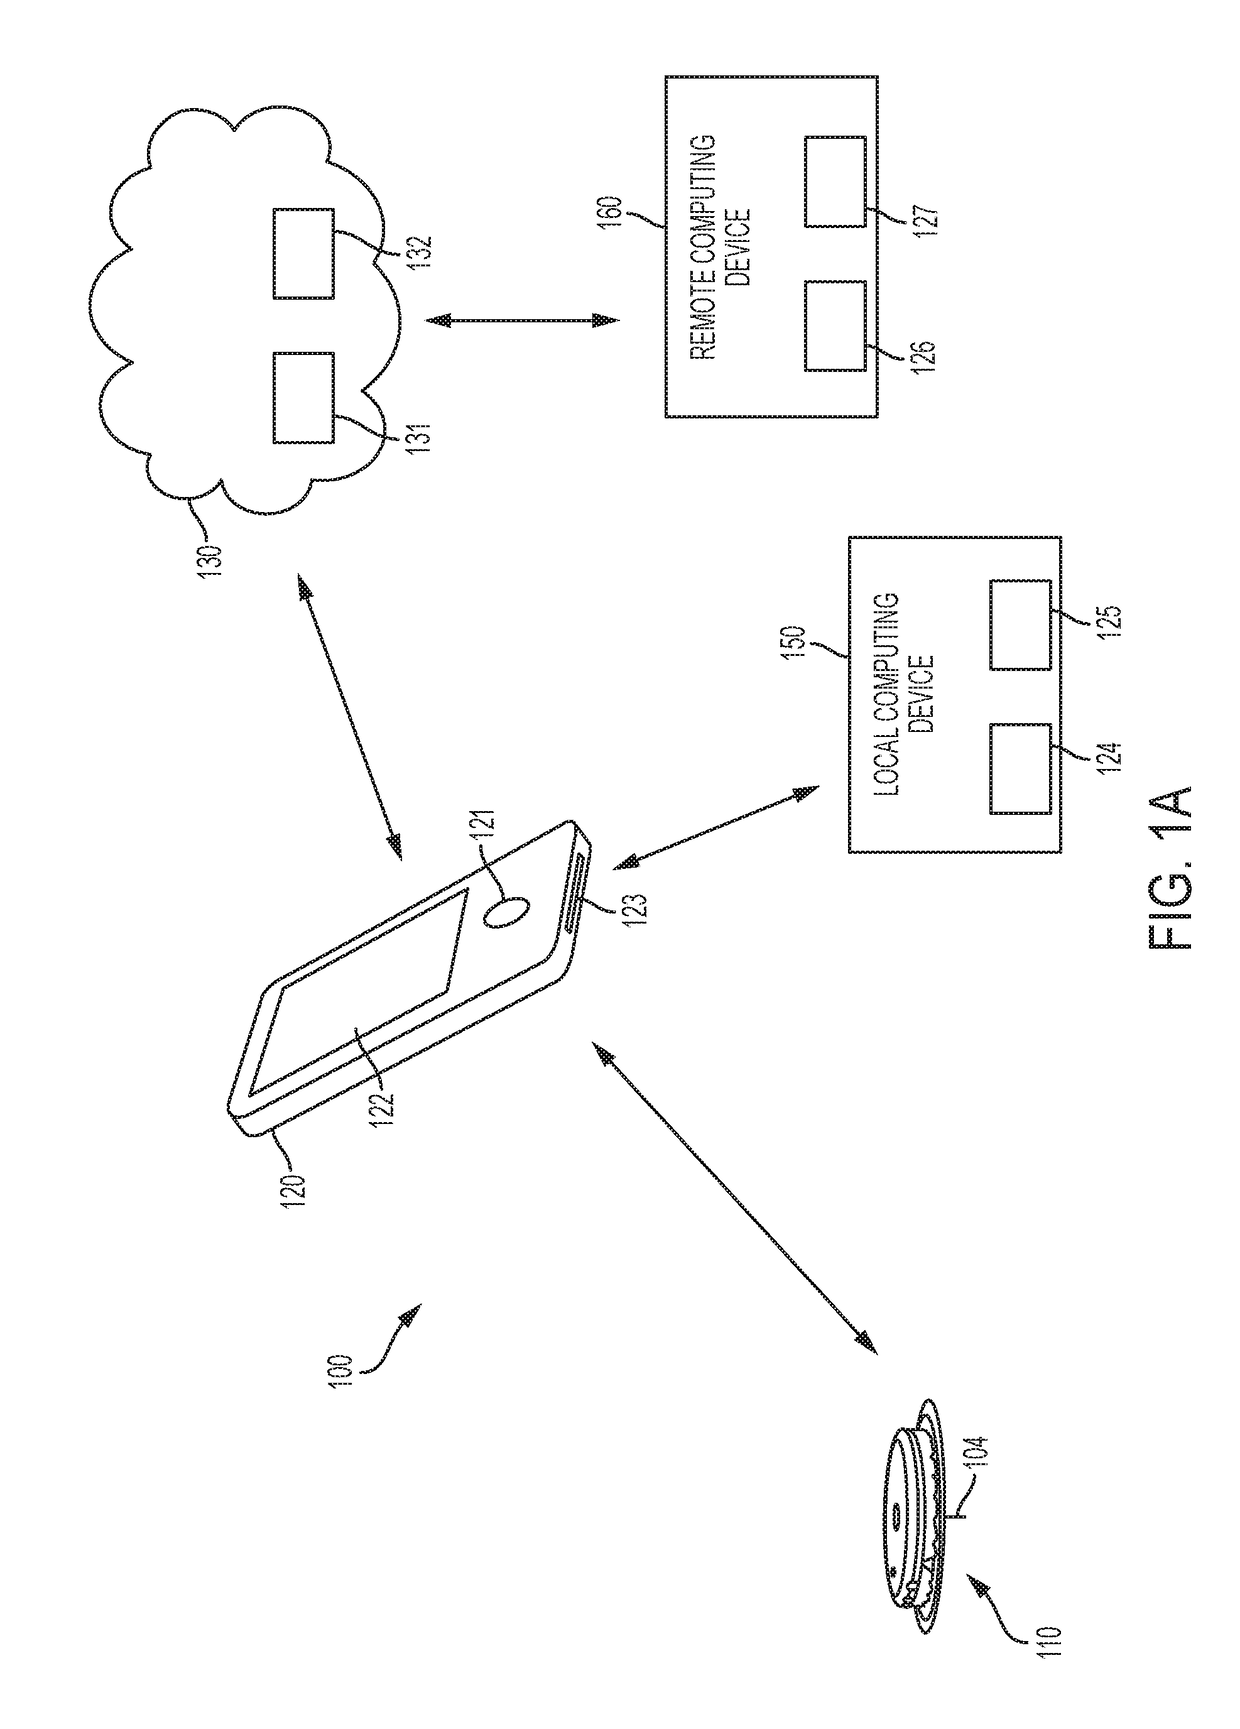 Systems, devices, and methods for episode detection and evaluation